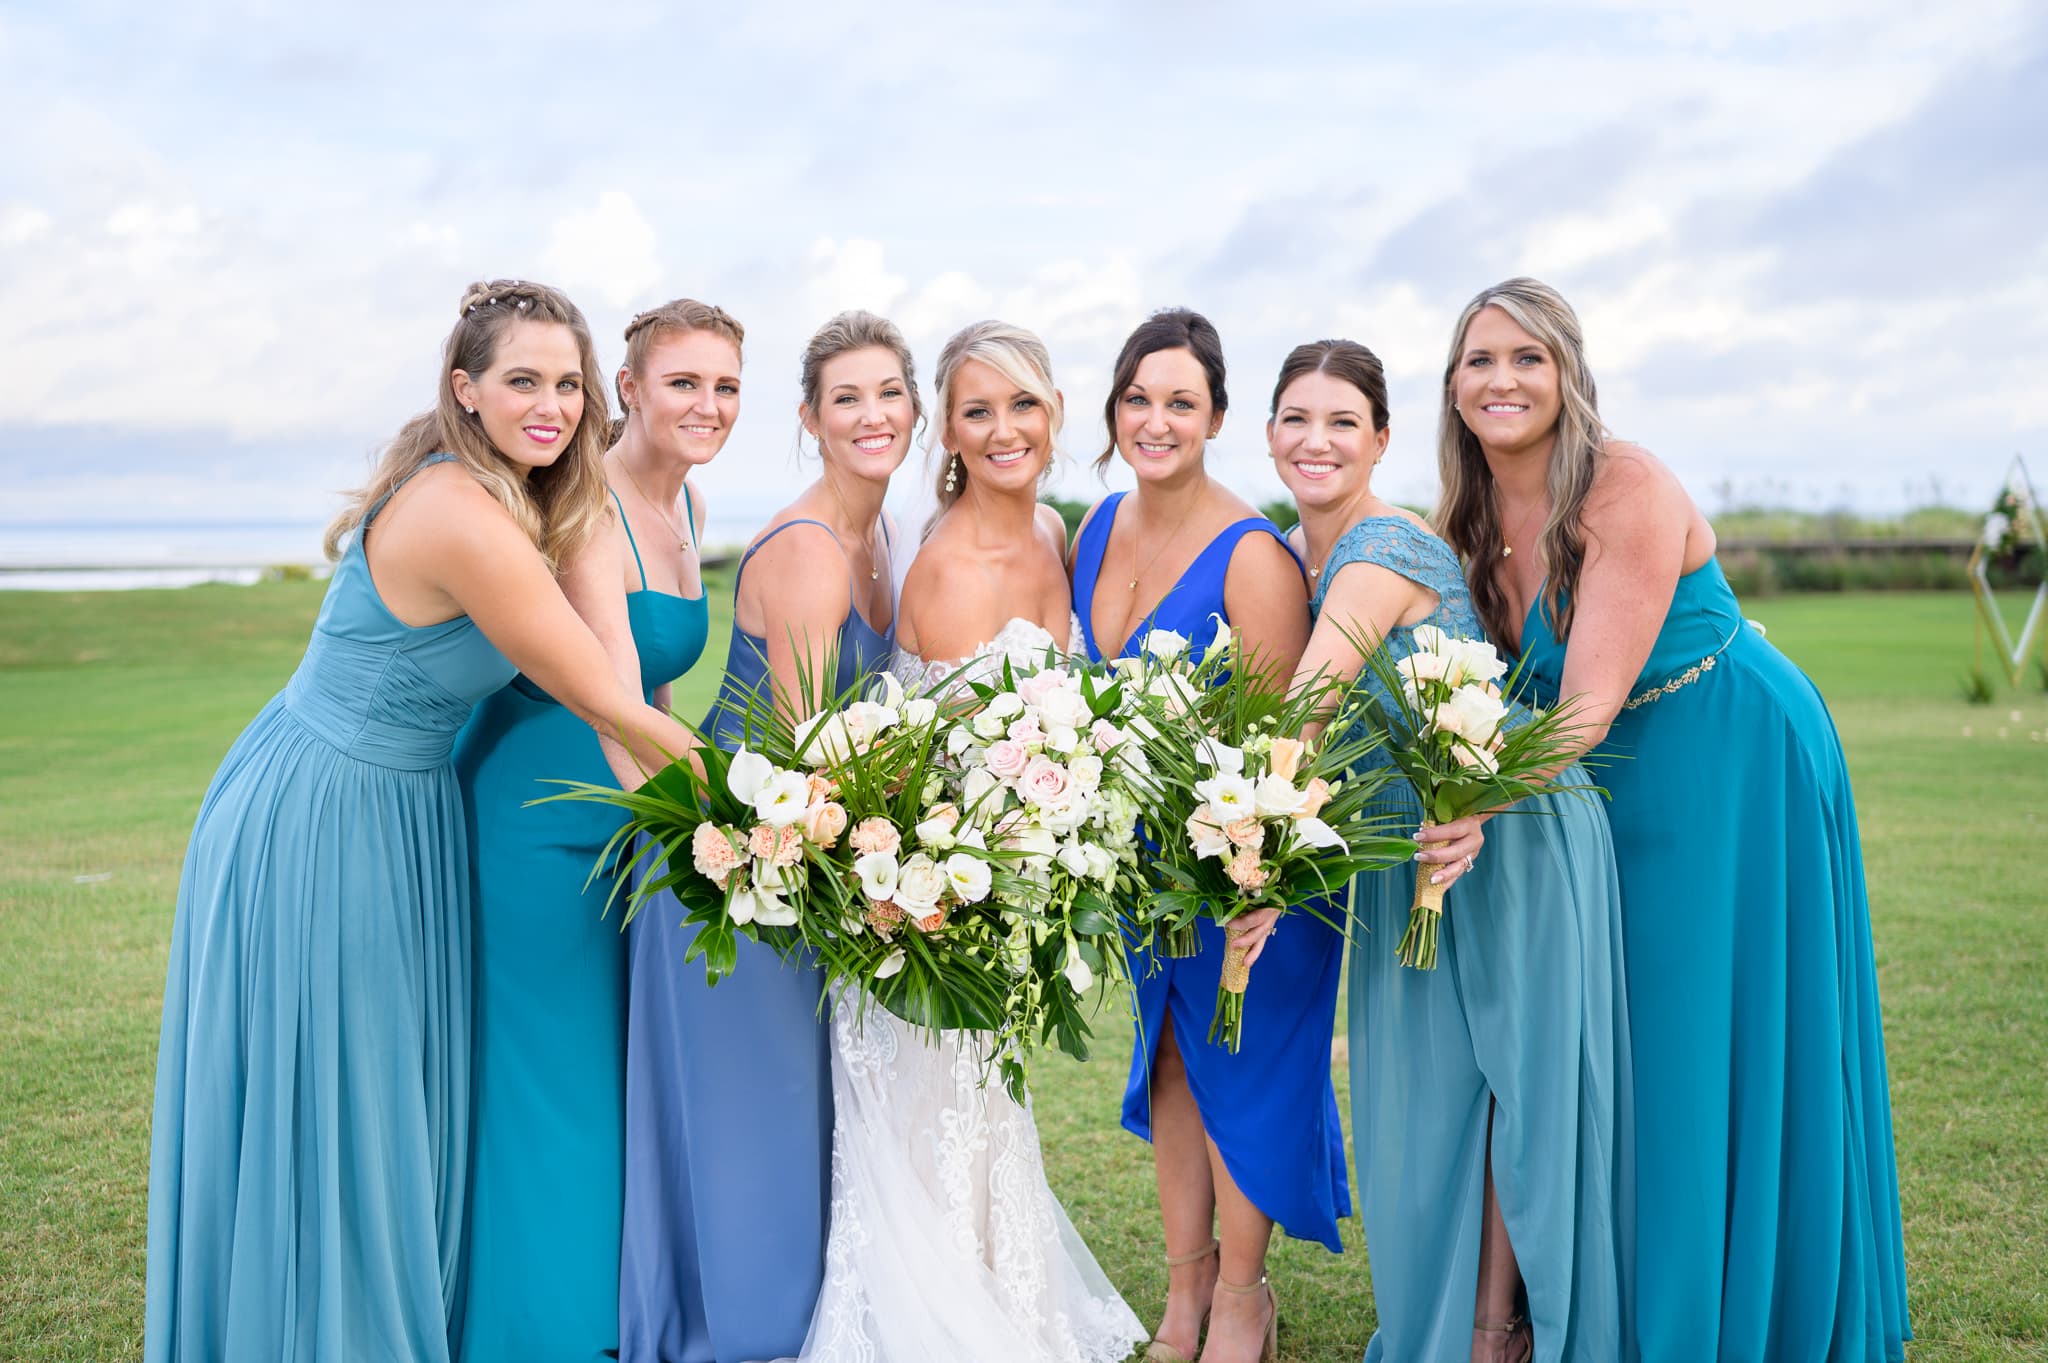 Bridesmaids holding the flowers together - Dunes Golf and Beach Club